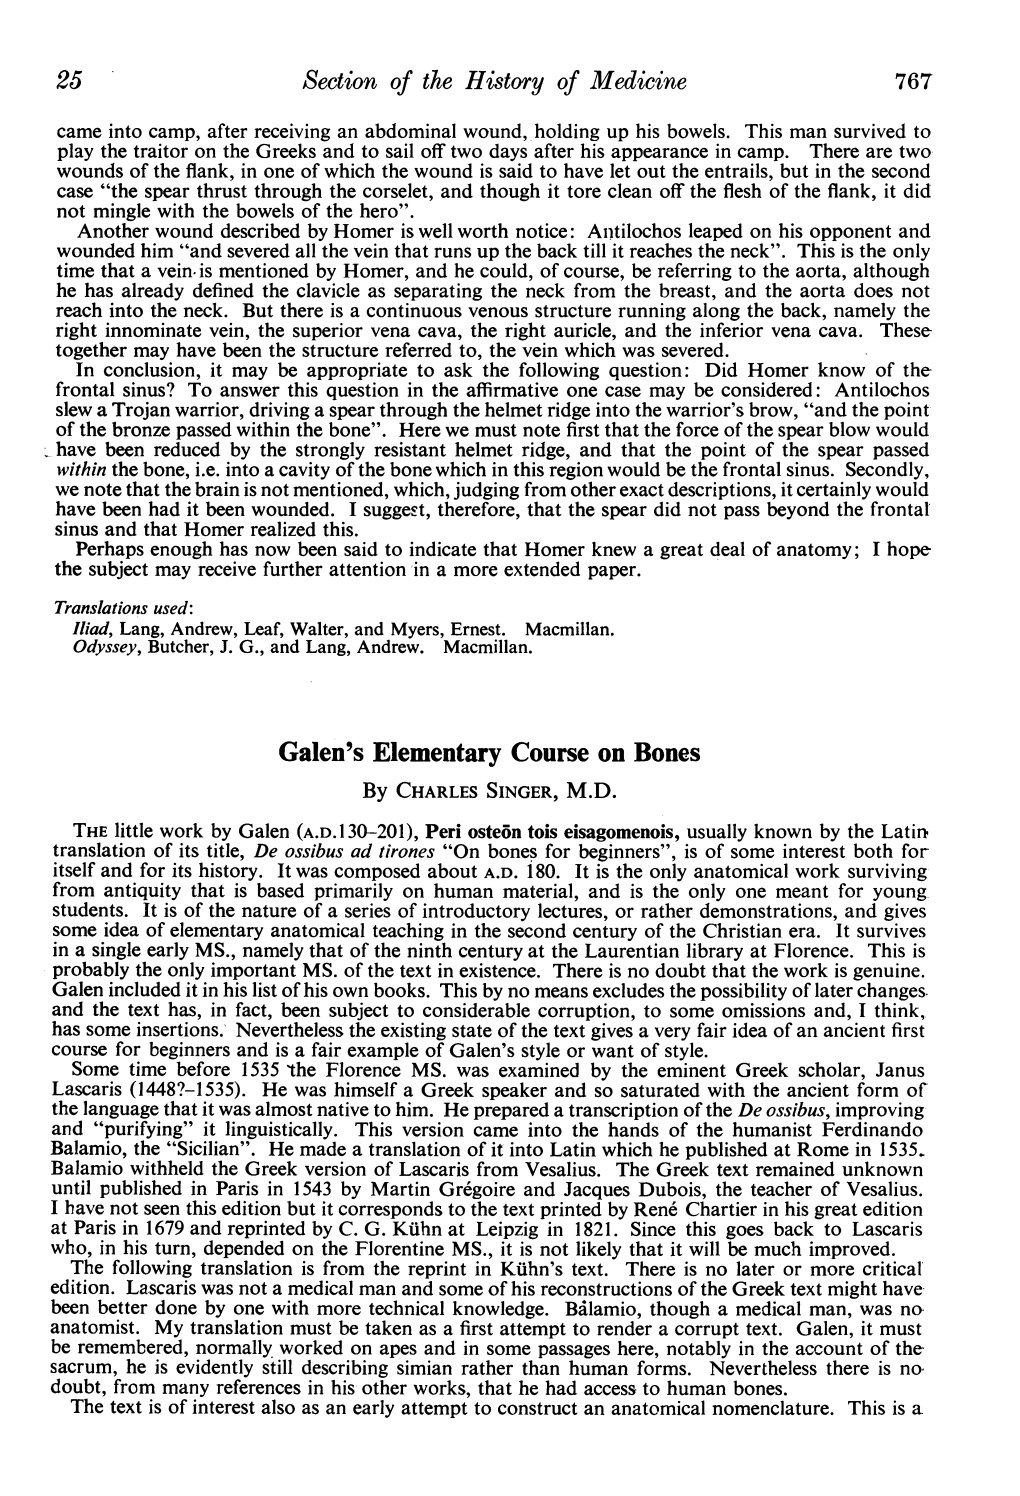 Galen's Elementary Course on Bones by CHARLES SINGER, M.D